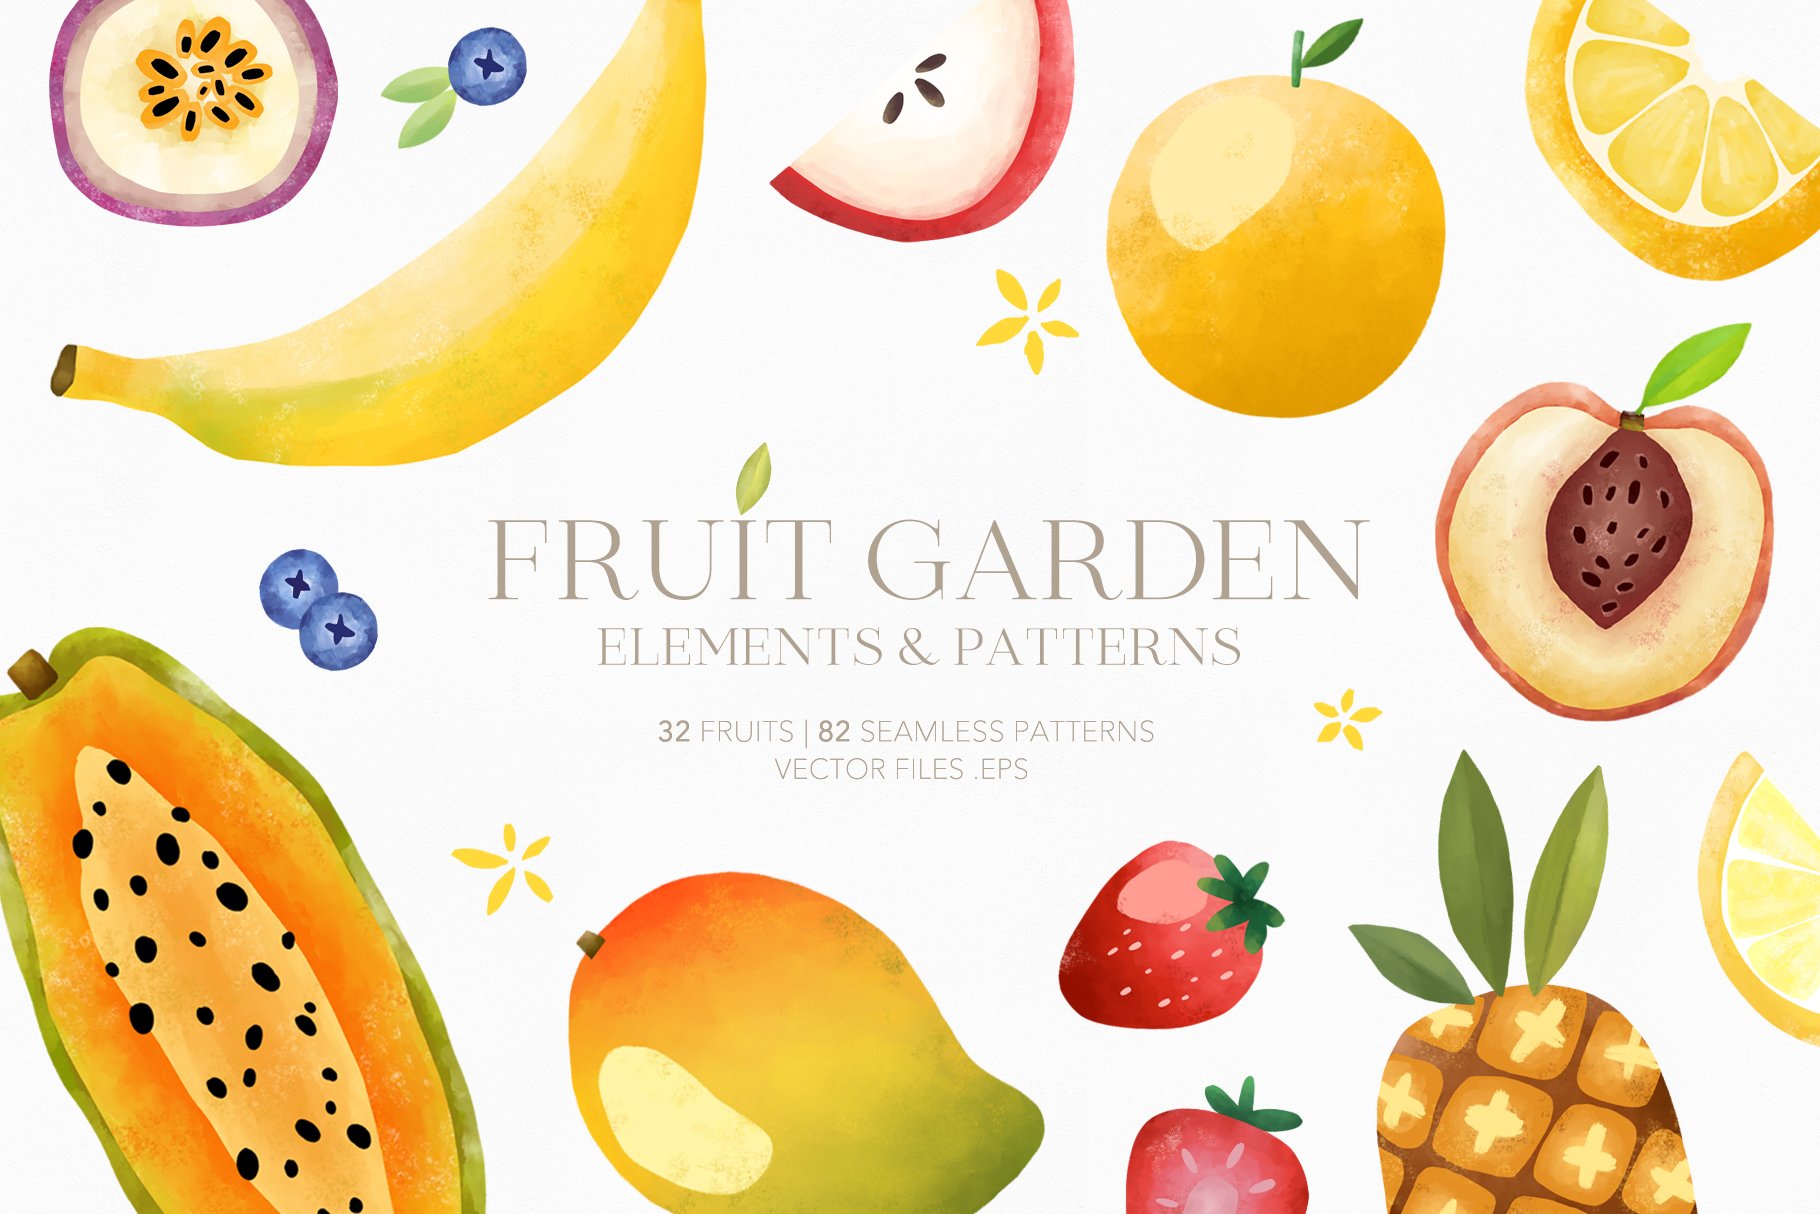 Fruit Garden Elements and Patterns cover image.